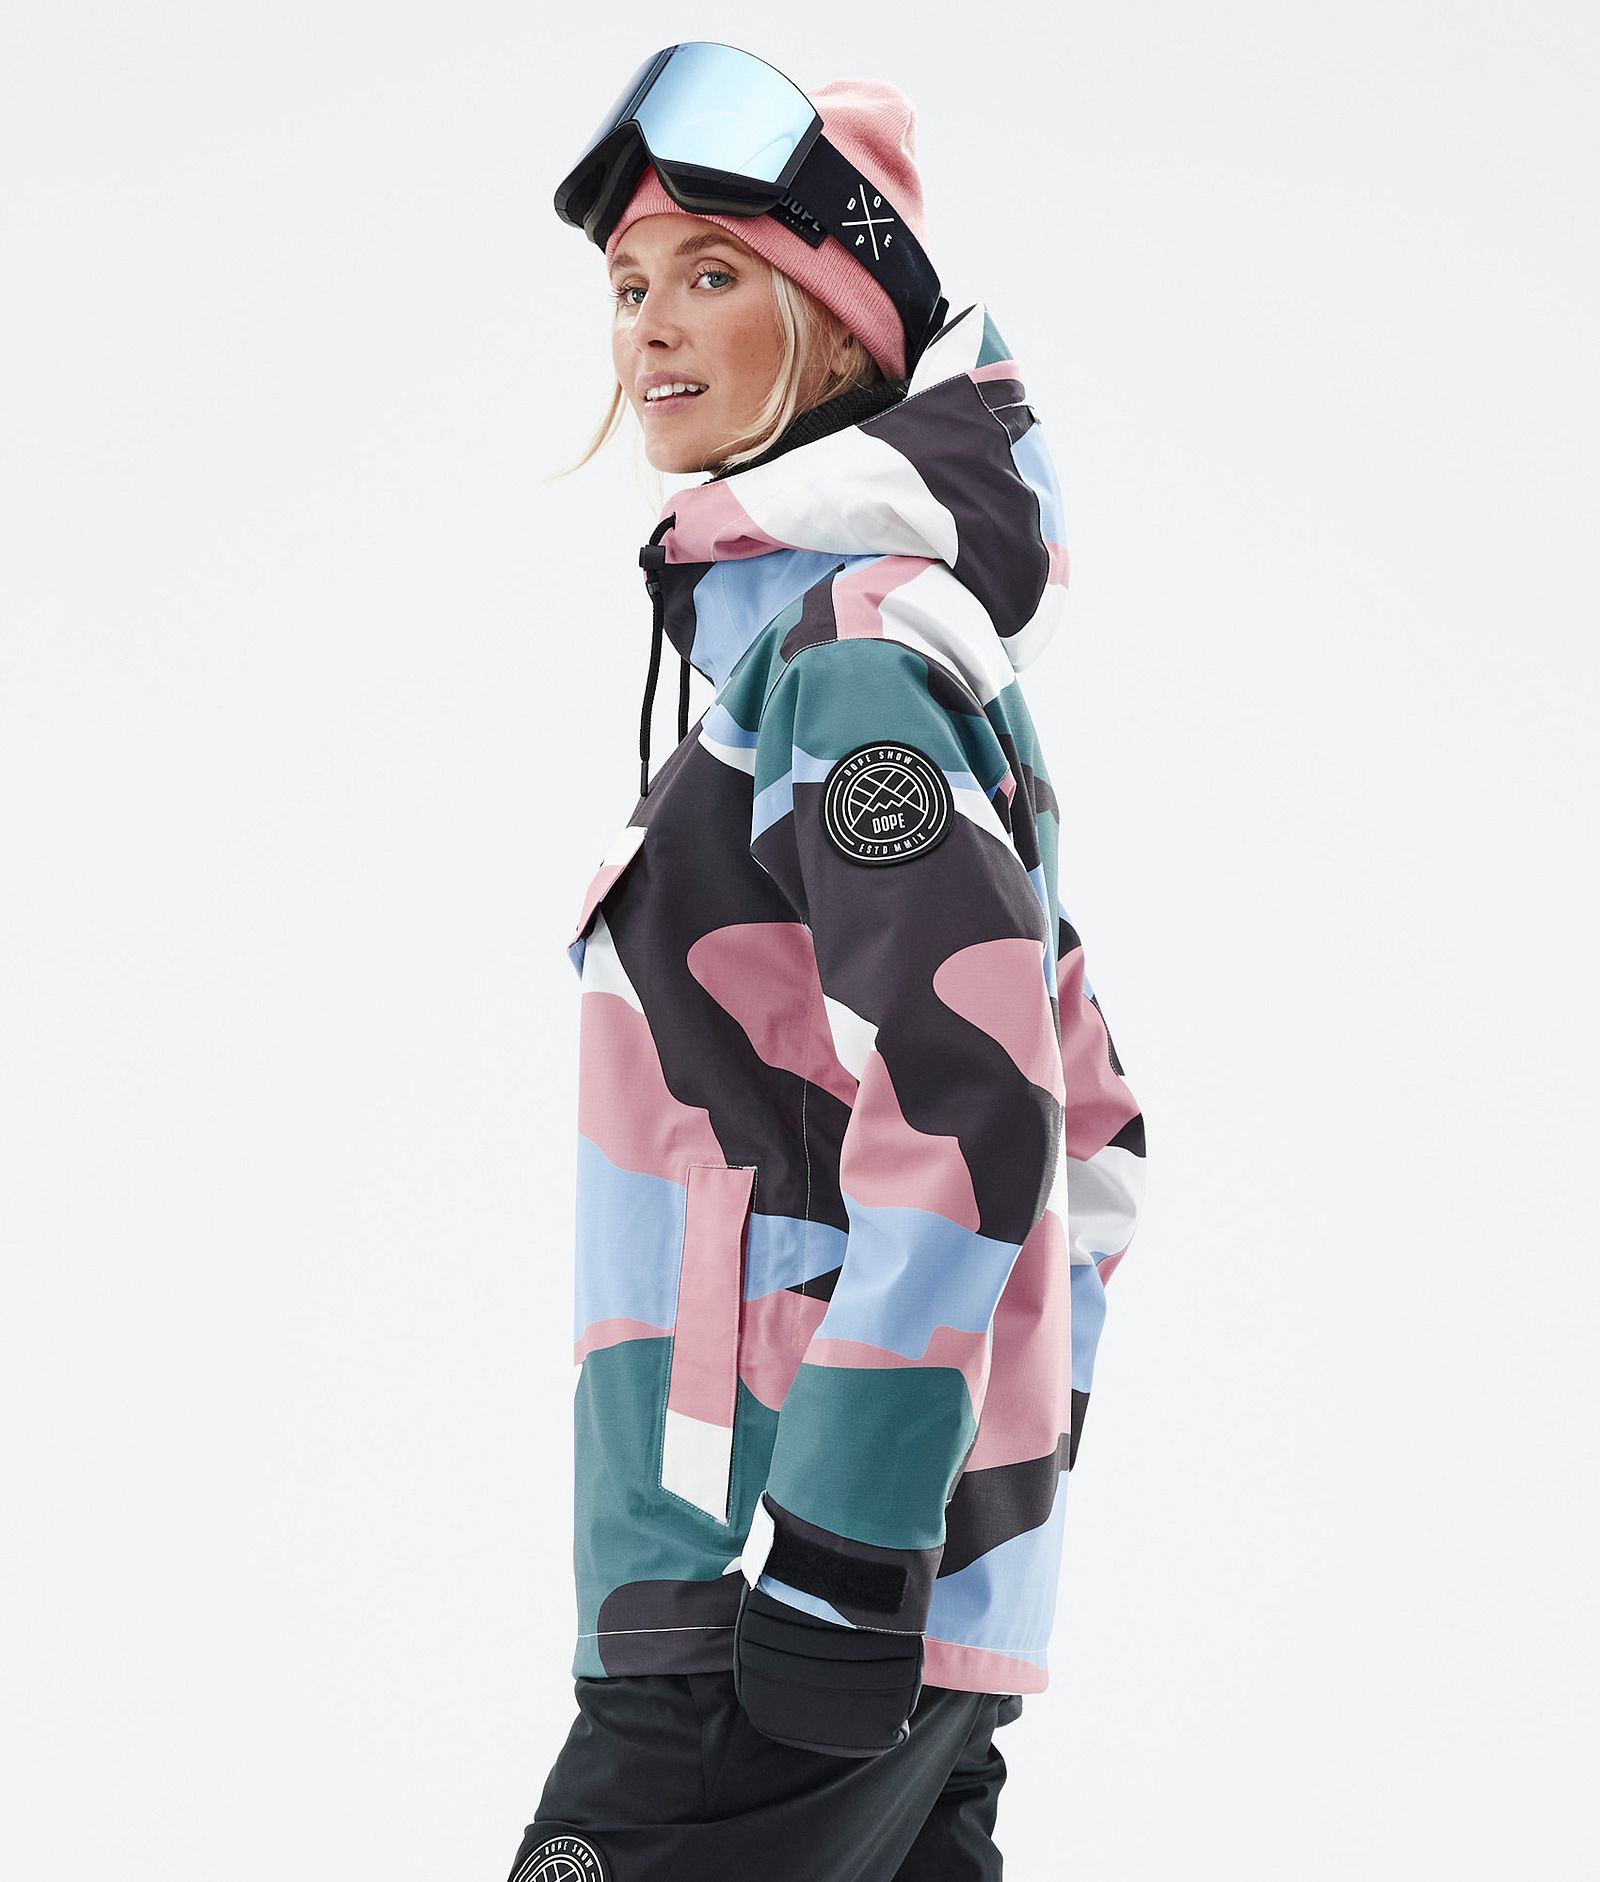 Blizzard W 2022 Giacca Snowboard Donna Shards Light Blue Muted Pink Renewed, Immagine 6 di 9